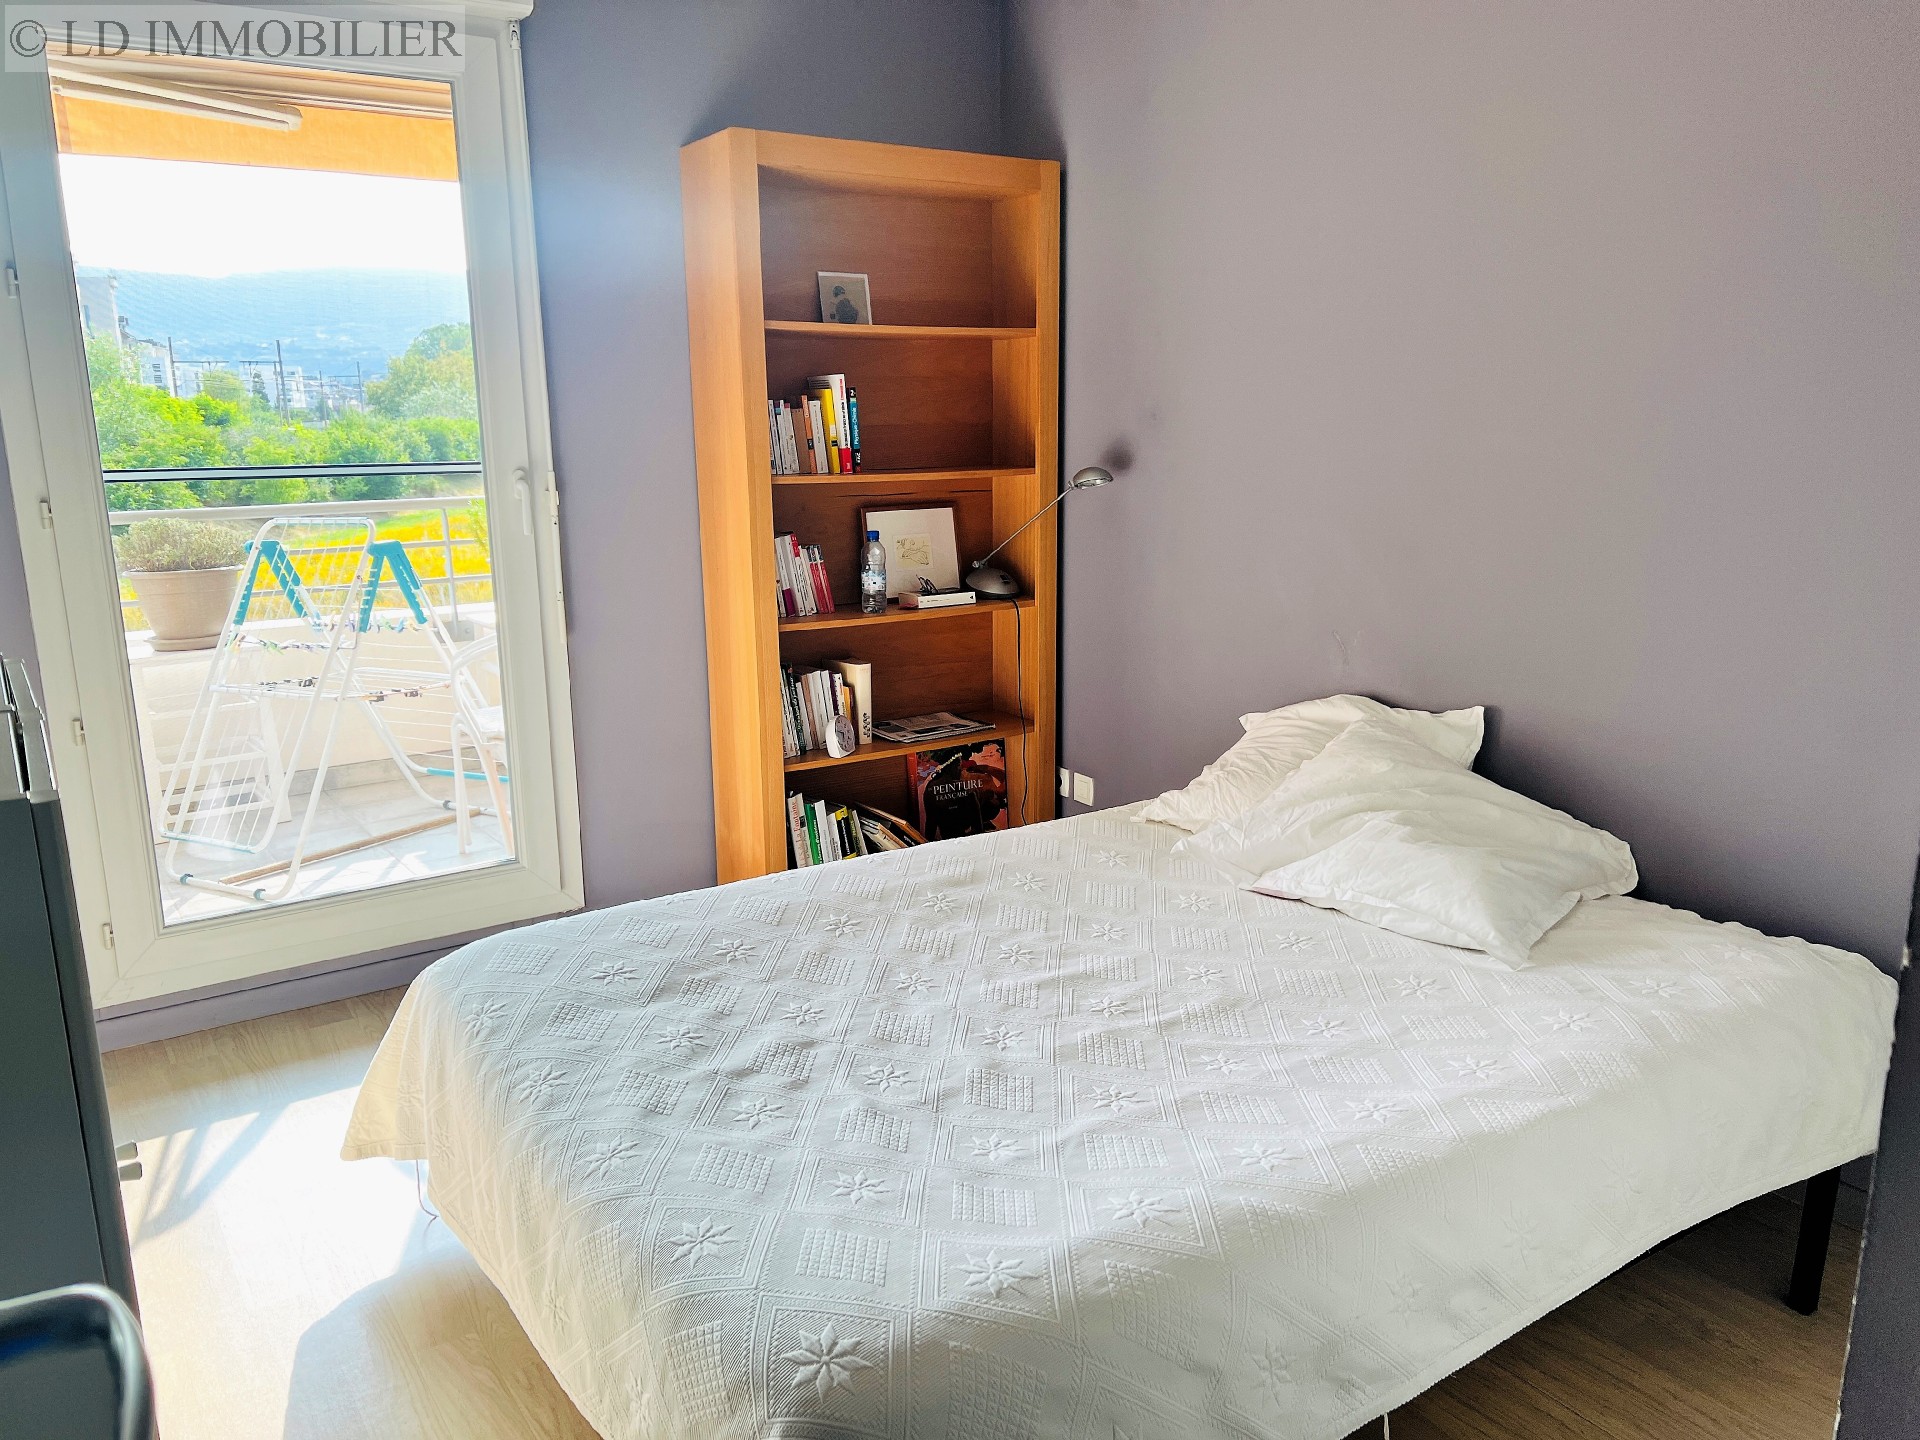 Vente appartement - CHAMBERY 69 m², 3 pièces